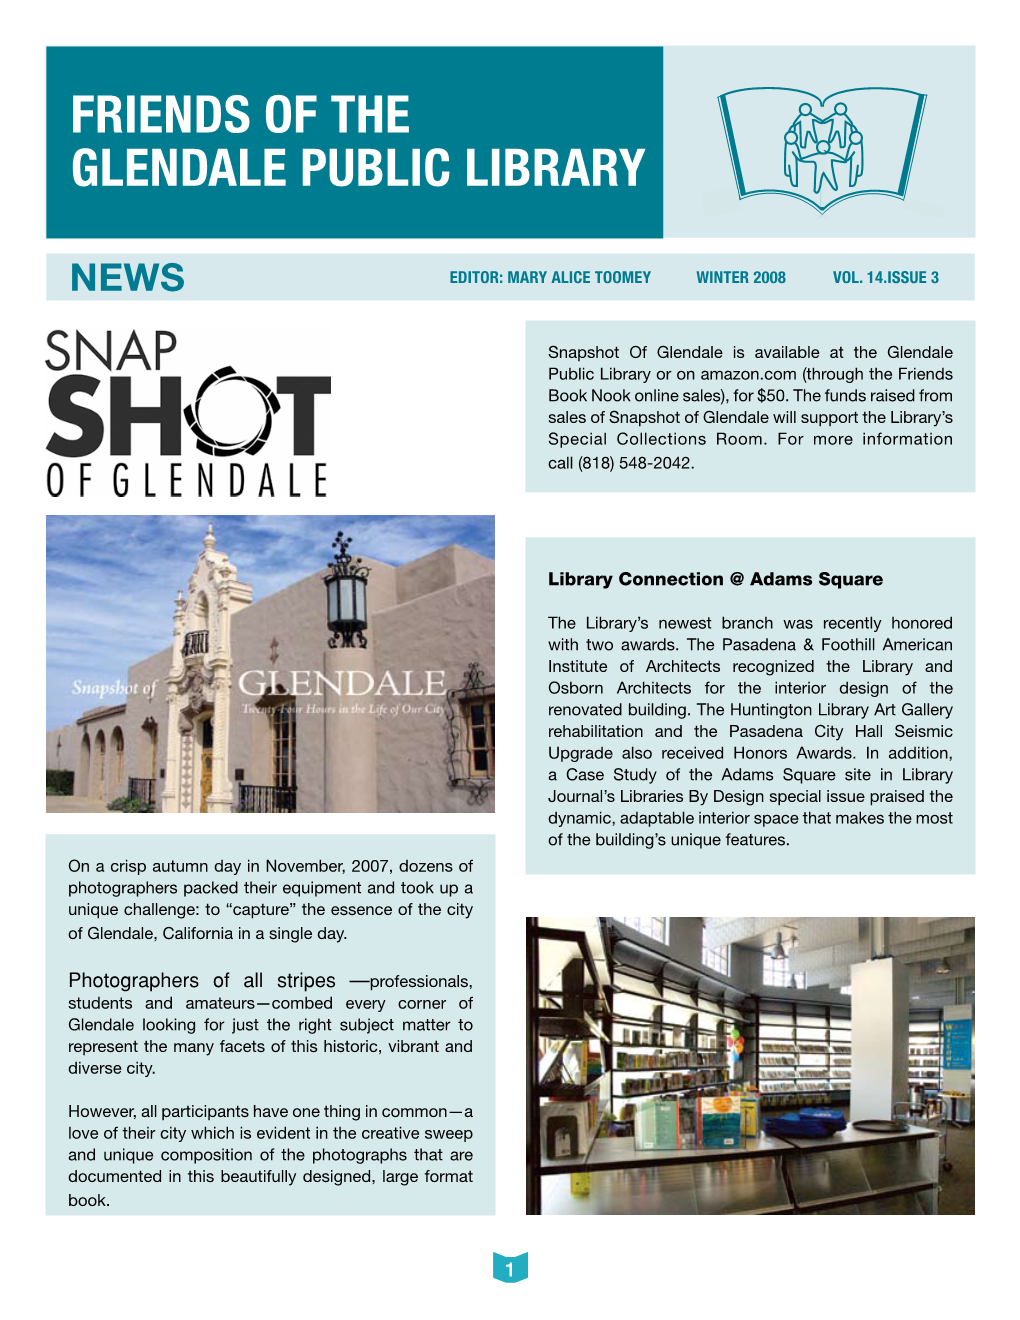 Friends of the Glendale Public Library